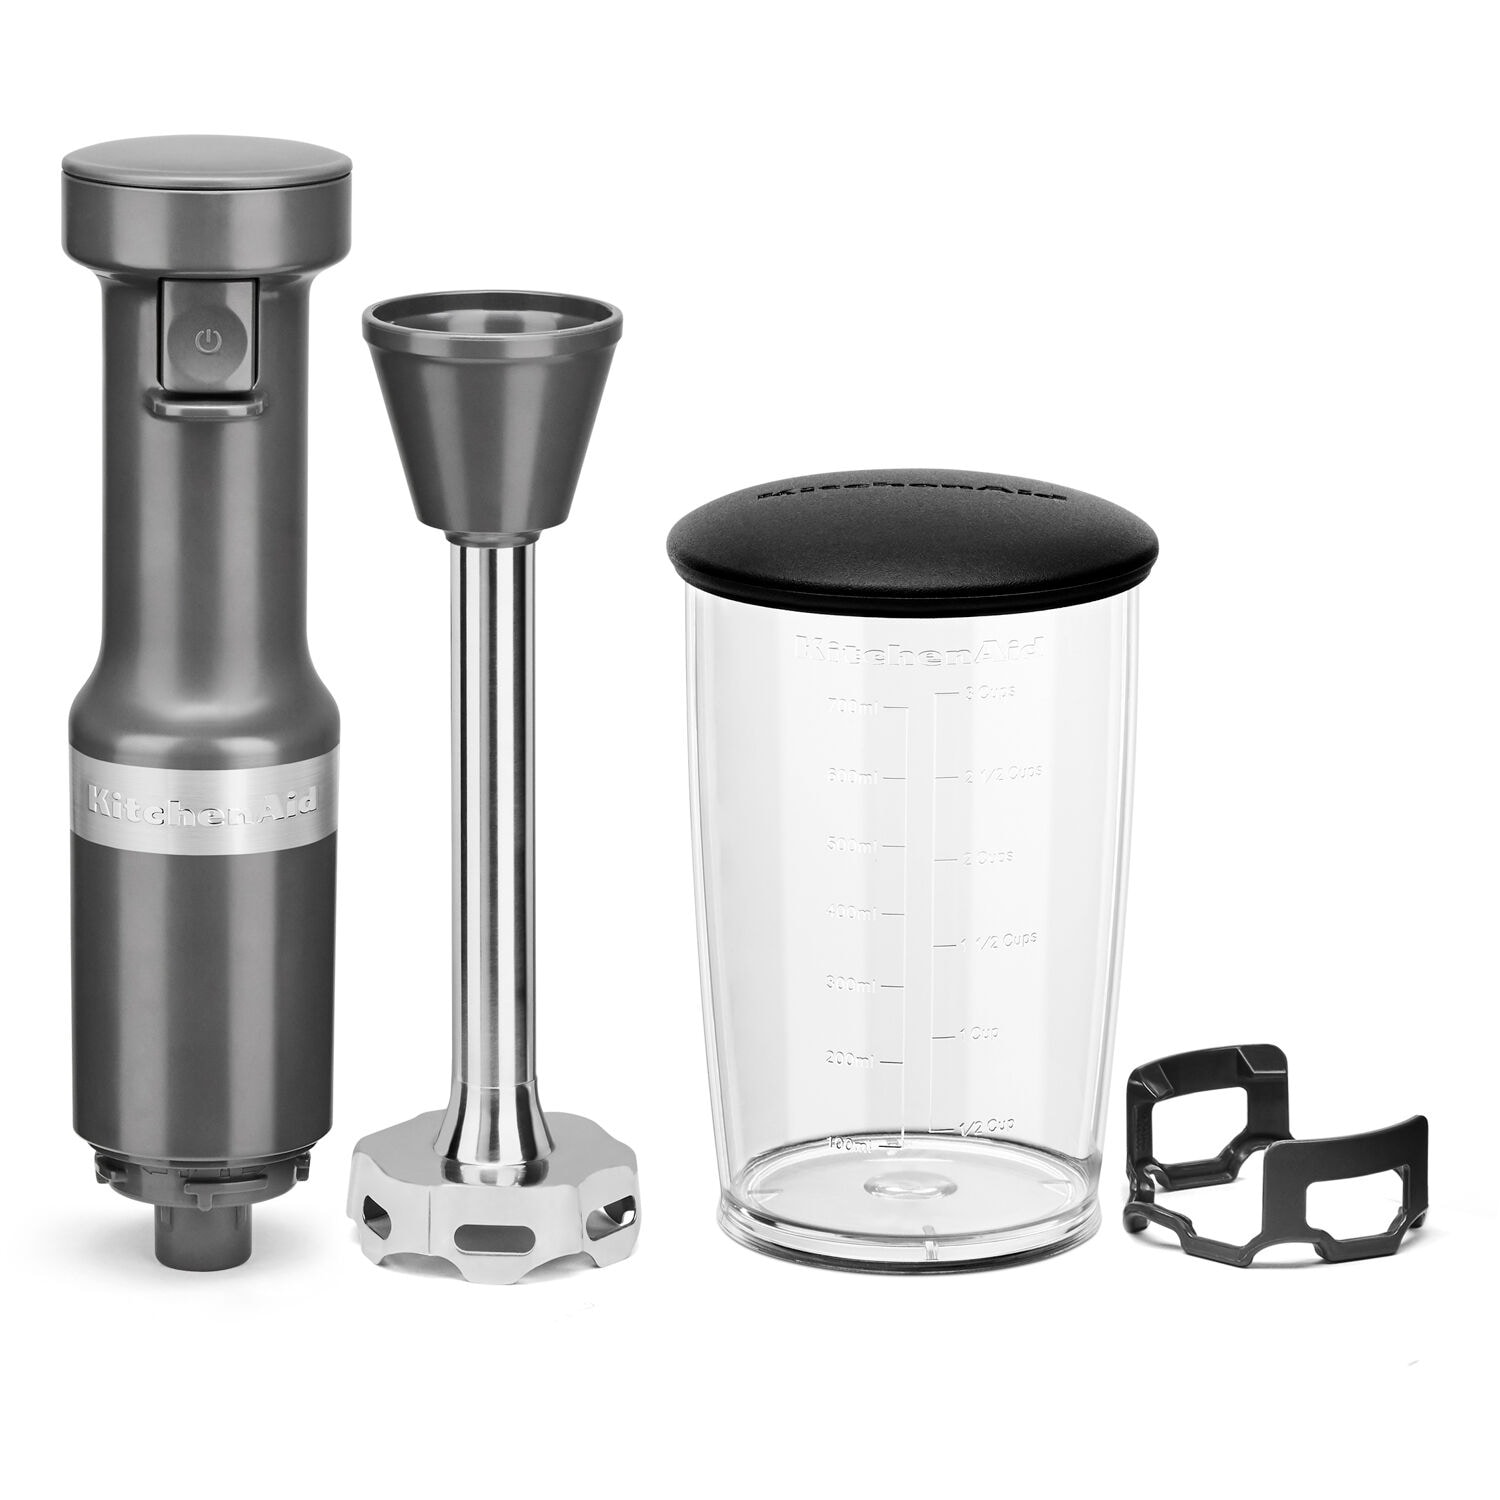 https://ak1.ostkcdn.com/images/products/is/images/direct/f1b5f9fbf5ef16ae481aaf0ddd89e87cf465c6b5/KitchenAid-Corded-Variable-Speed-Immersion-Blender-in-Charcoal-Gray-with-Blending-Jar.jpg